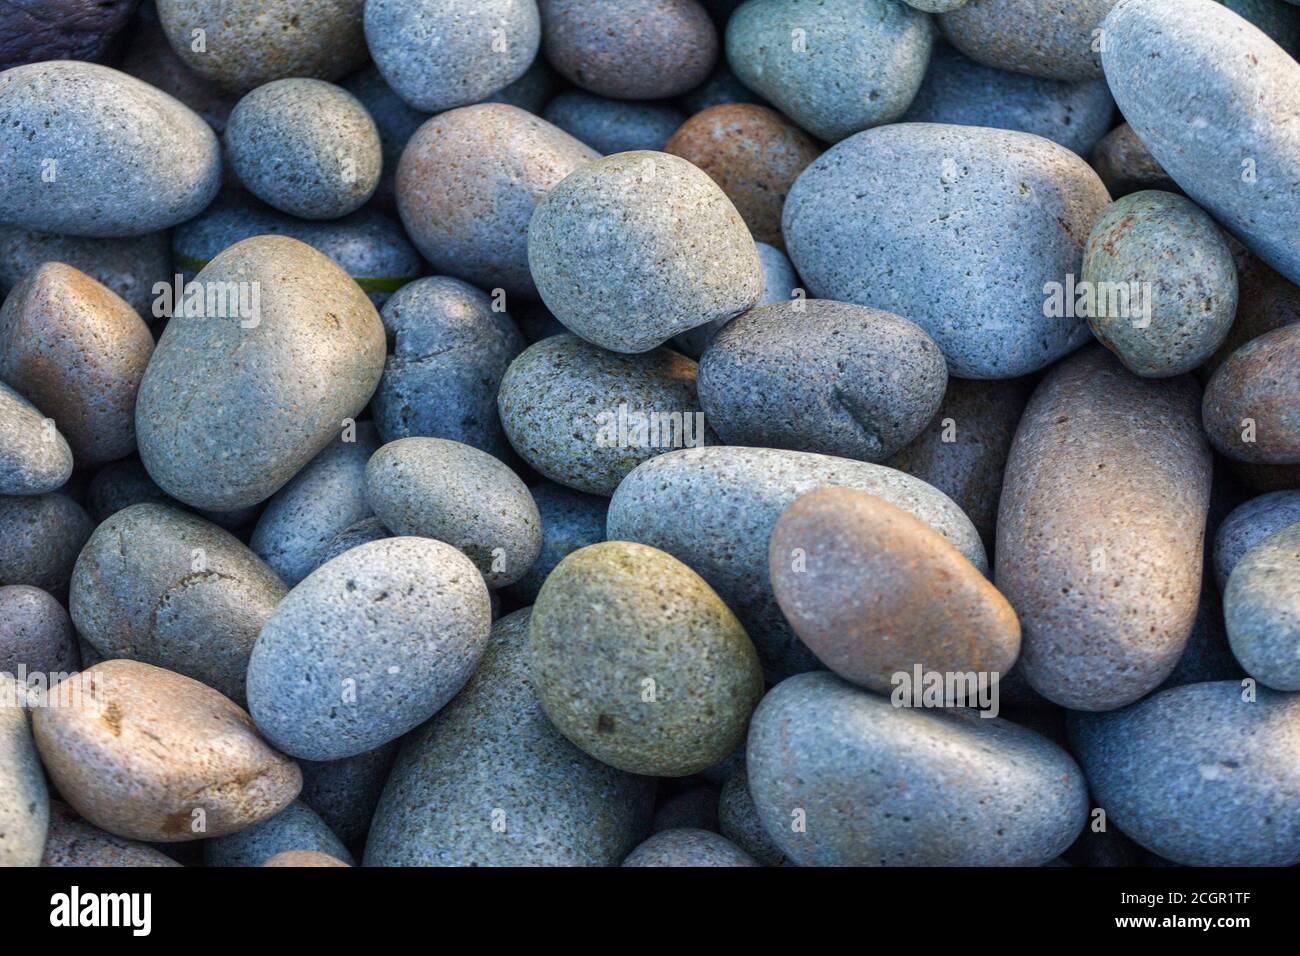 Smooth, round pebbles and rocks at a beach in Surigao City Stock Photo